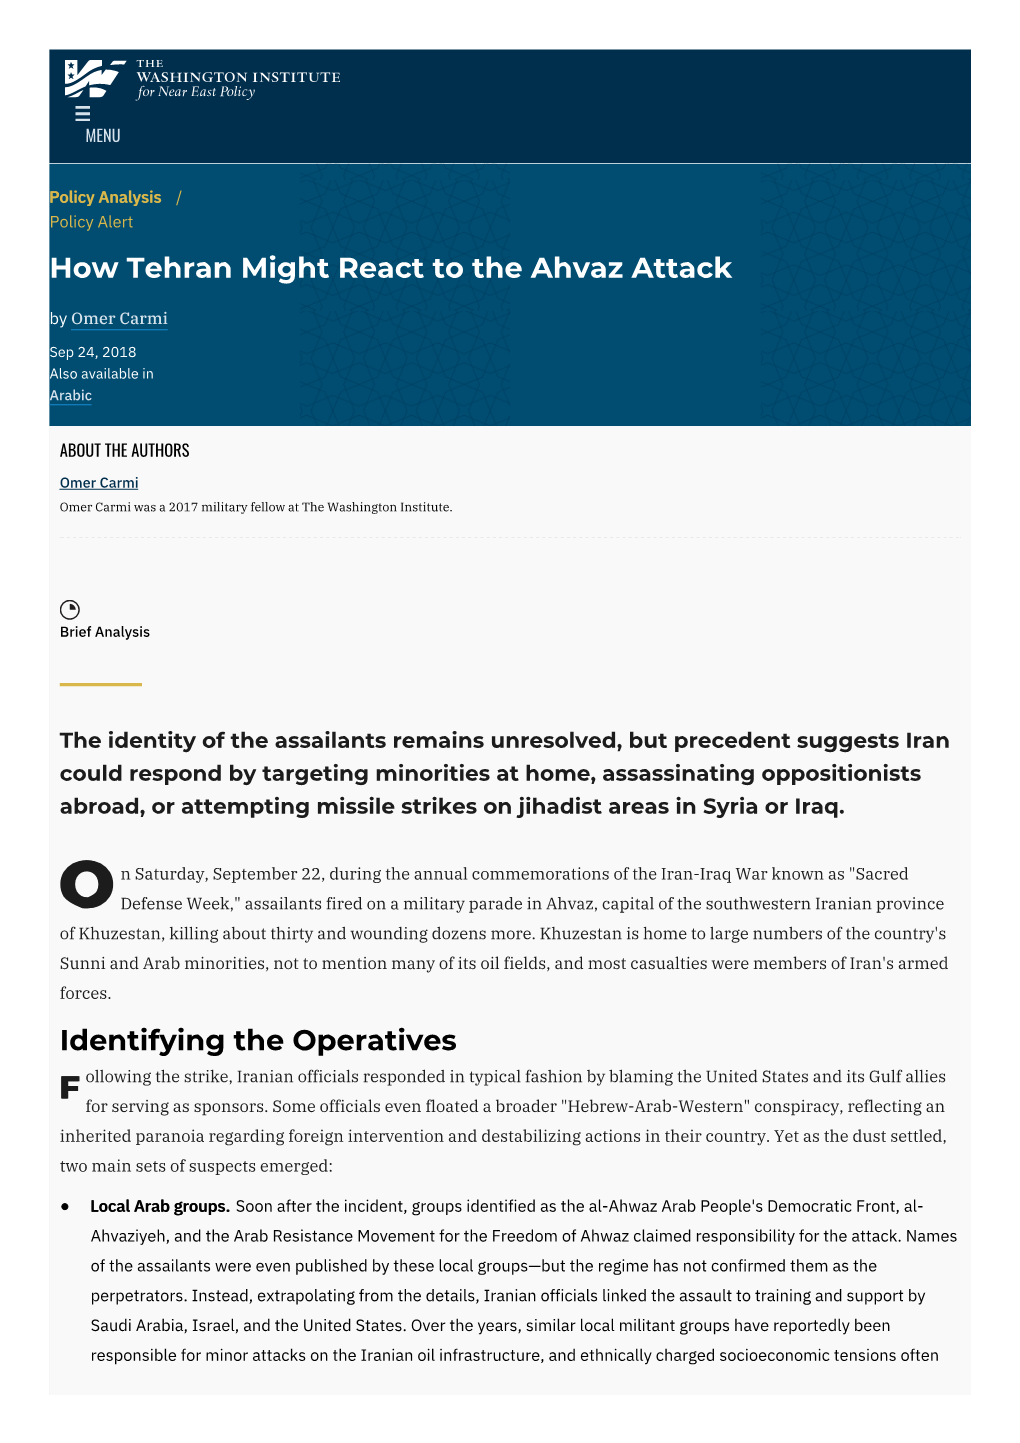 How Tehran Might React to the Ahvaz Attack | the Washington Institute